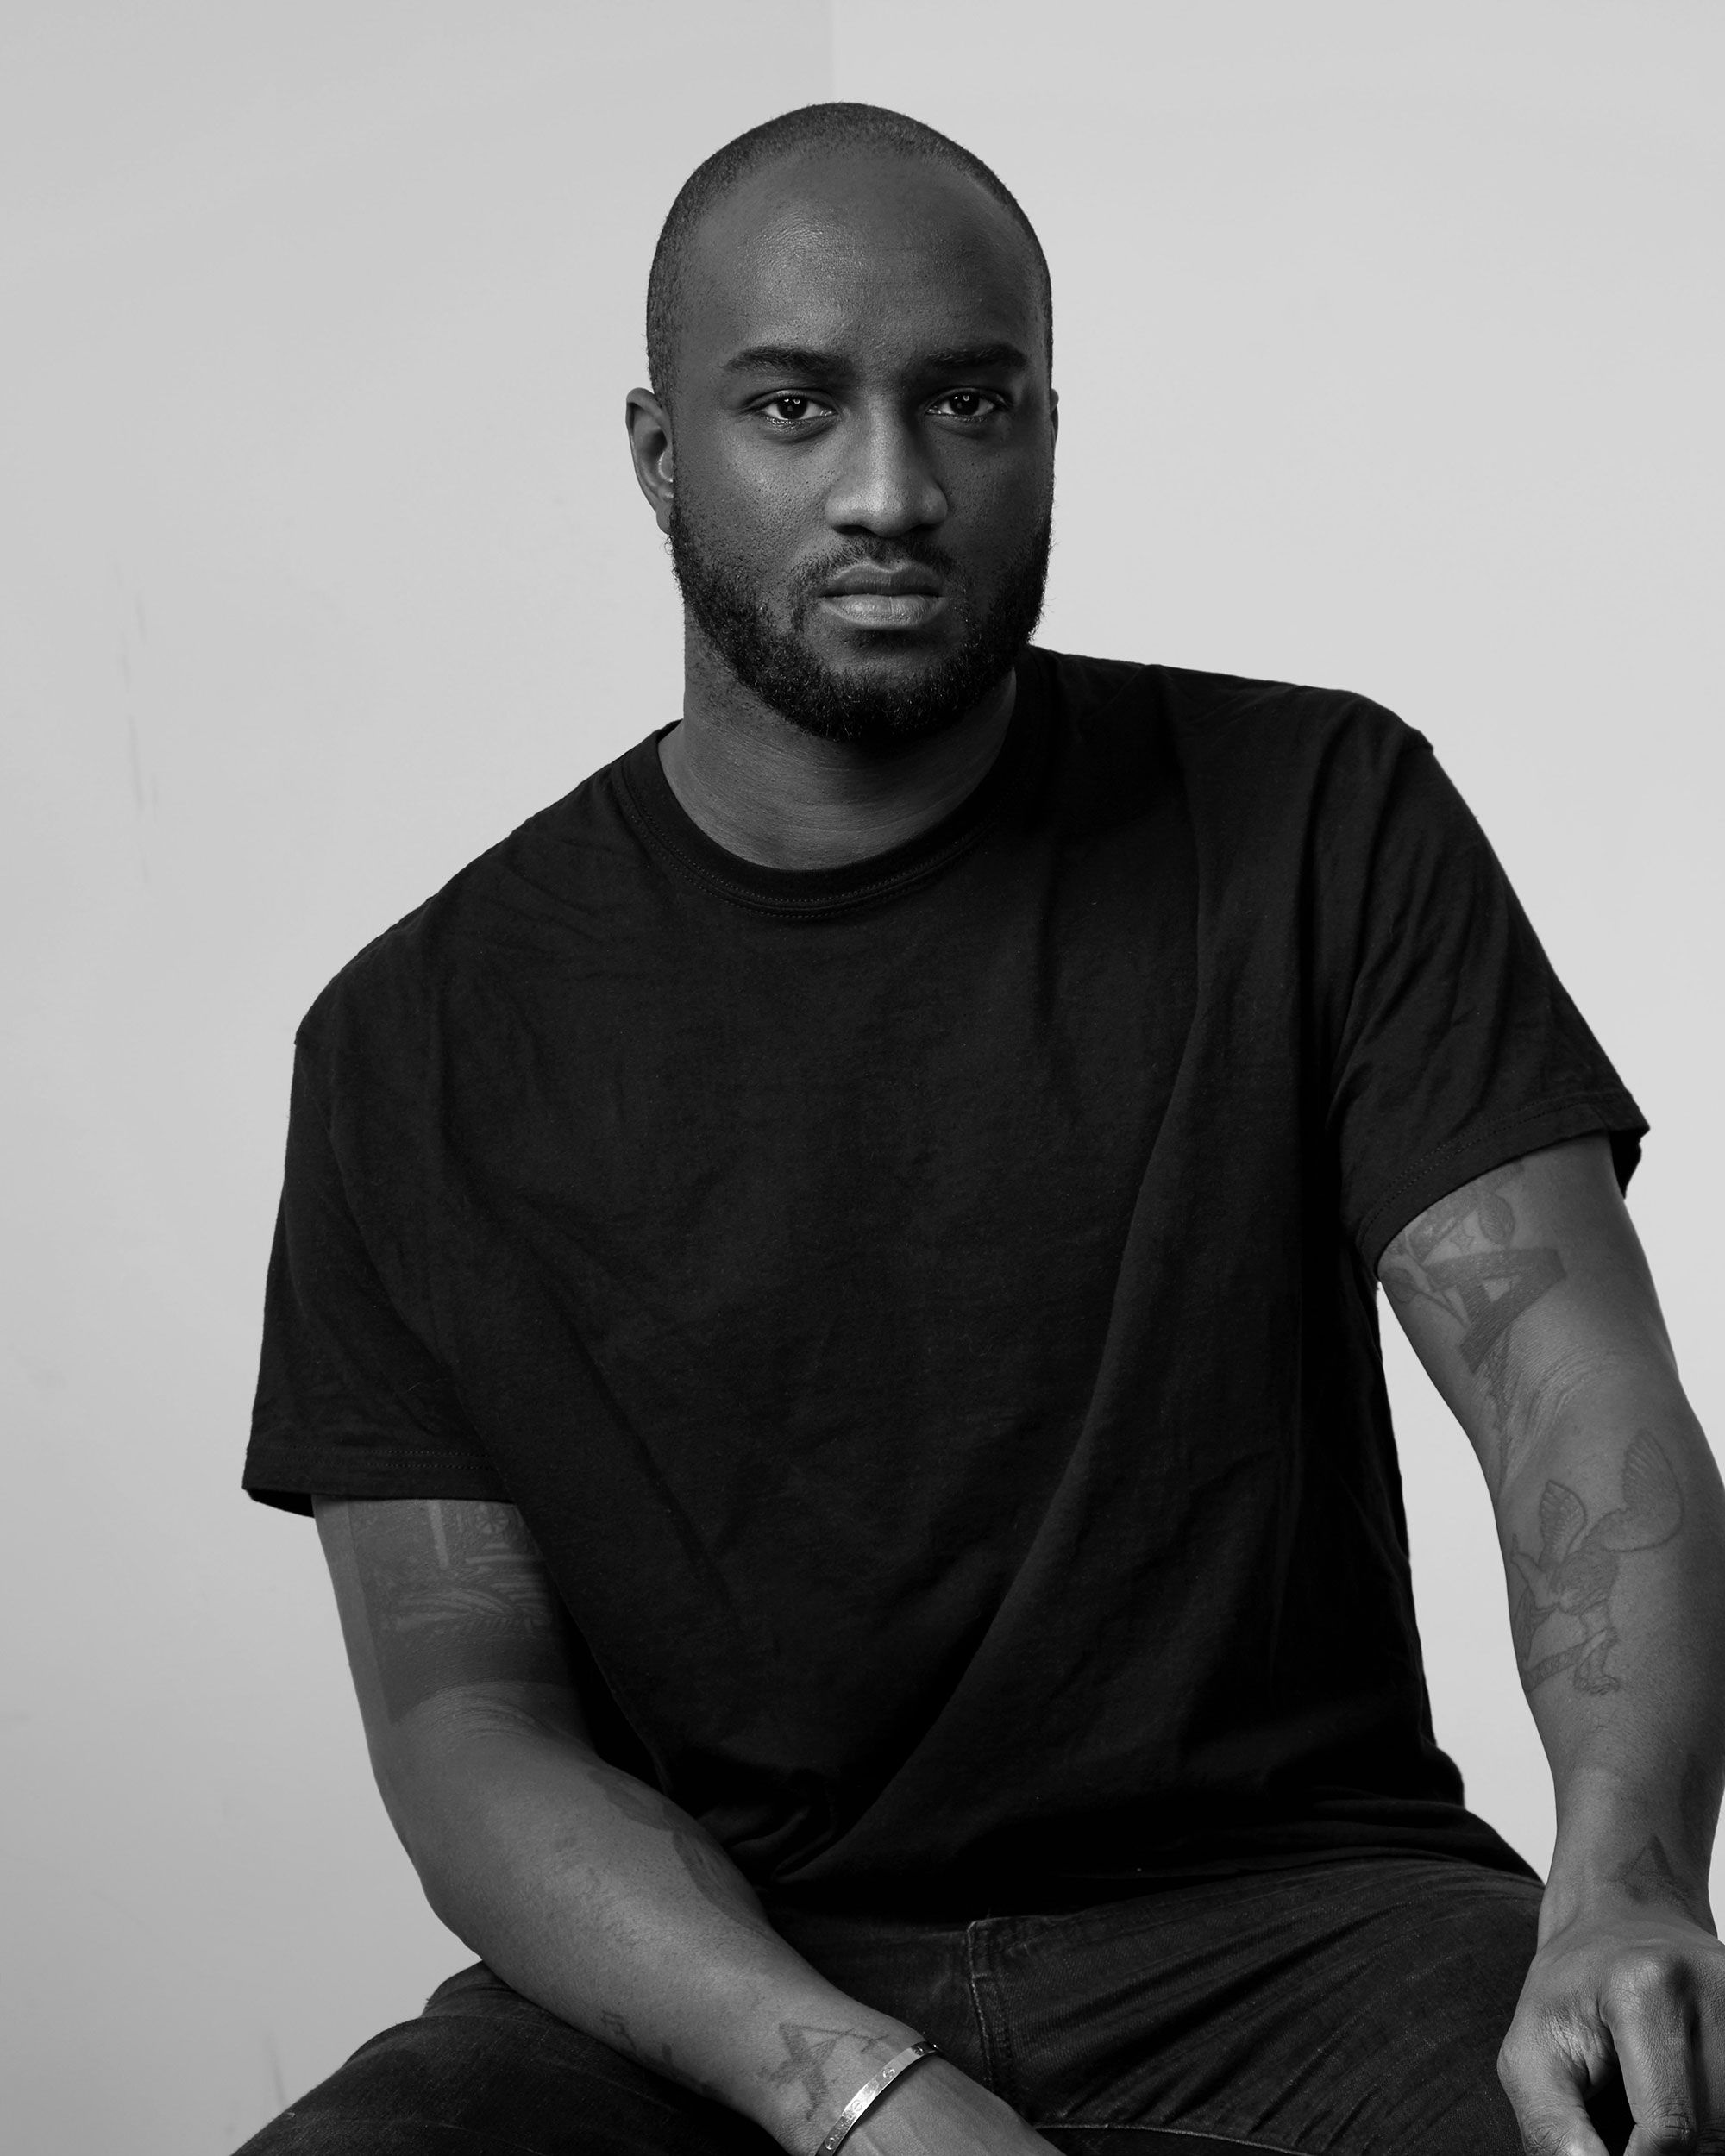 VIRGIL ABLOH: “FIGURES OF SPEECH” EXHIBITION AT THE BROOKLYN